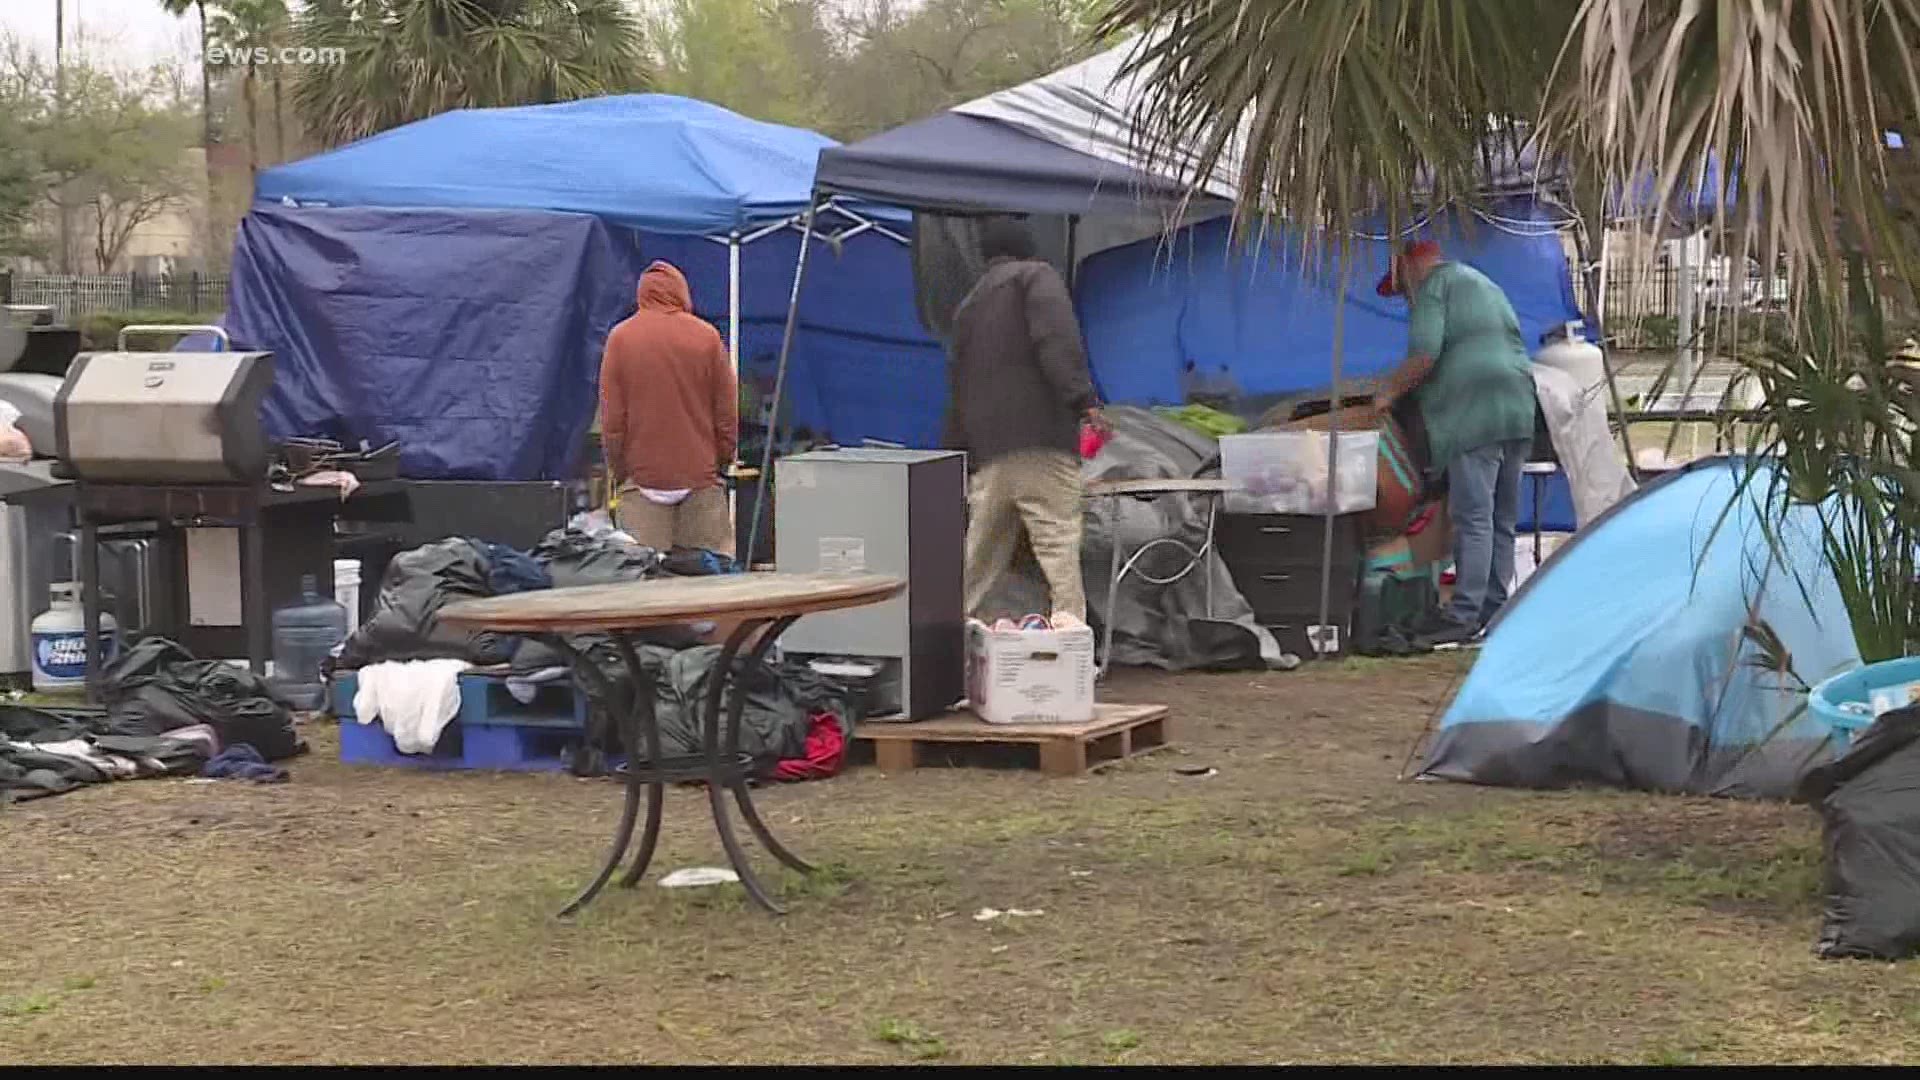 150200 people remain in Downtown Jacksonville homeless camp